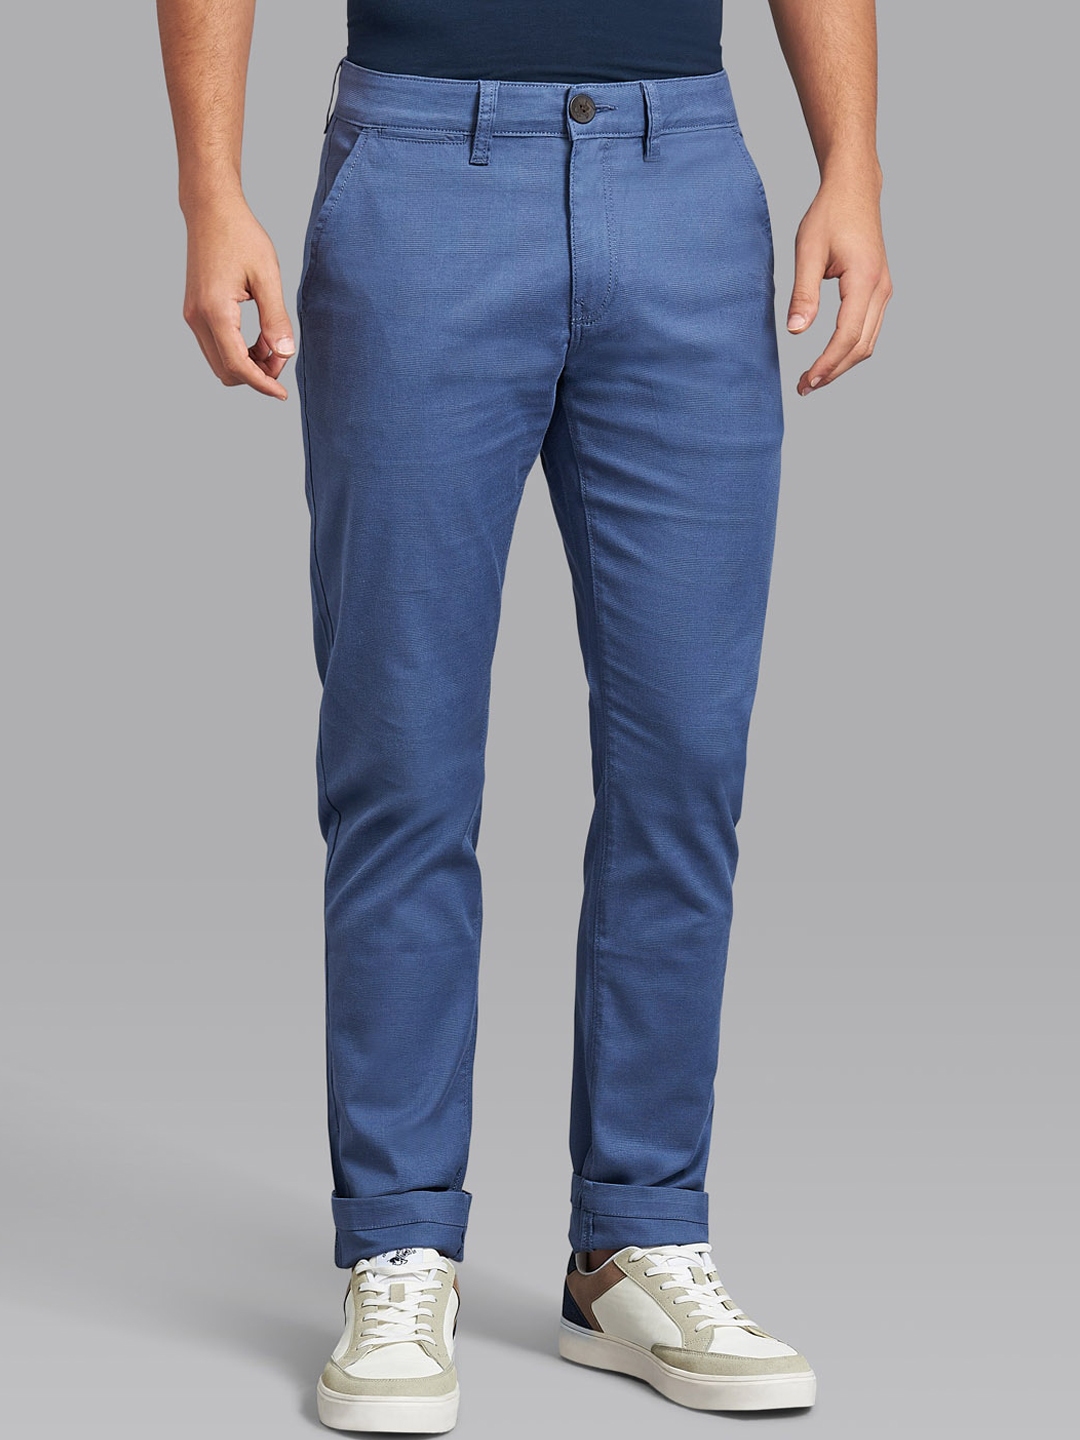 Buy Beverly Hills Polo Club Men Blue Solid Regular Fit Chinos ...